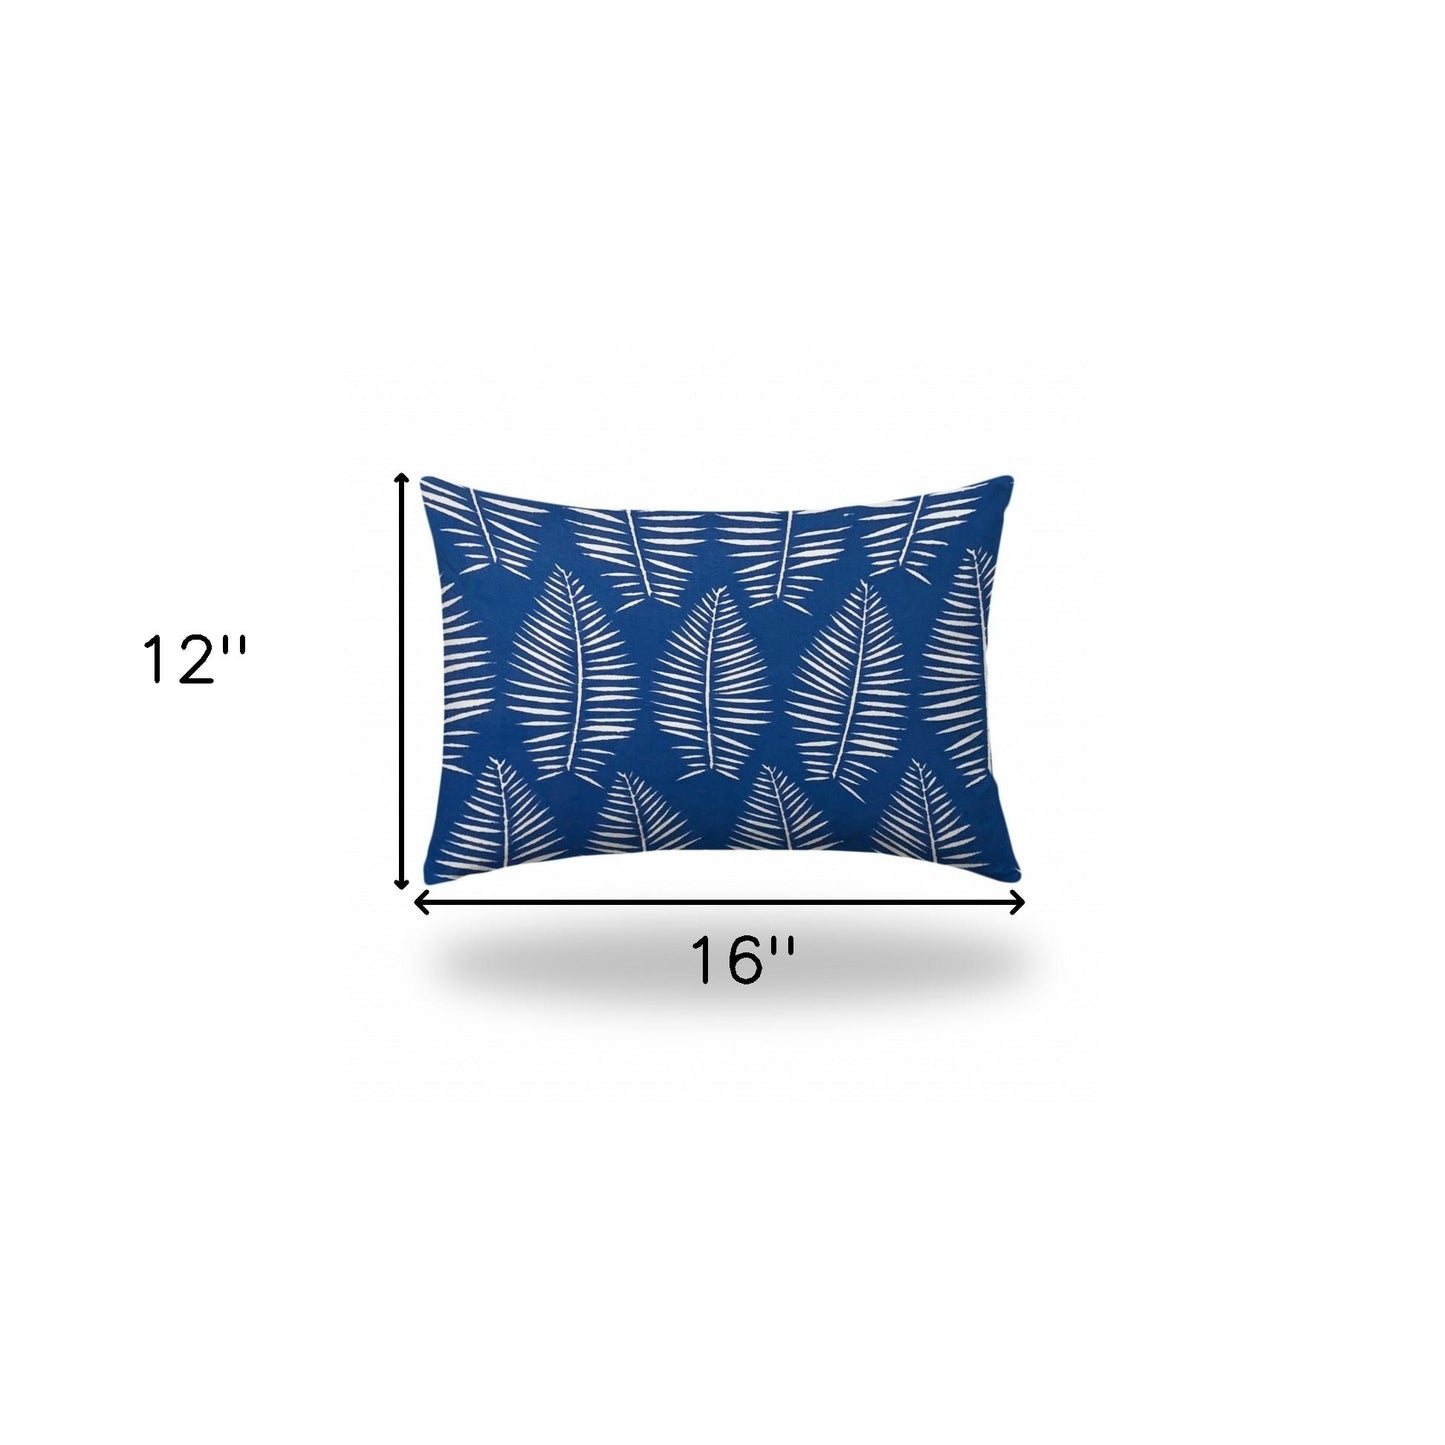 12" X 16" Blue And White Enveloped Tropical Lumbar Indoor Outdoor Pillow Cover